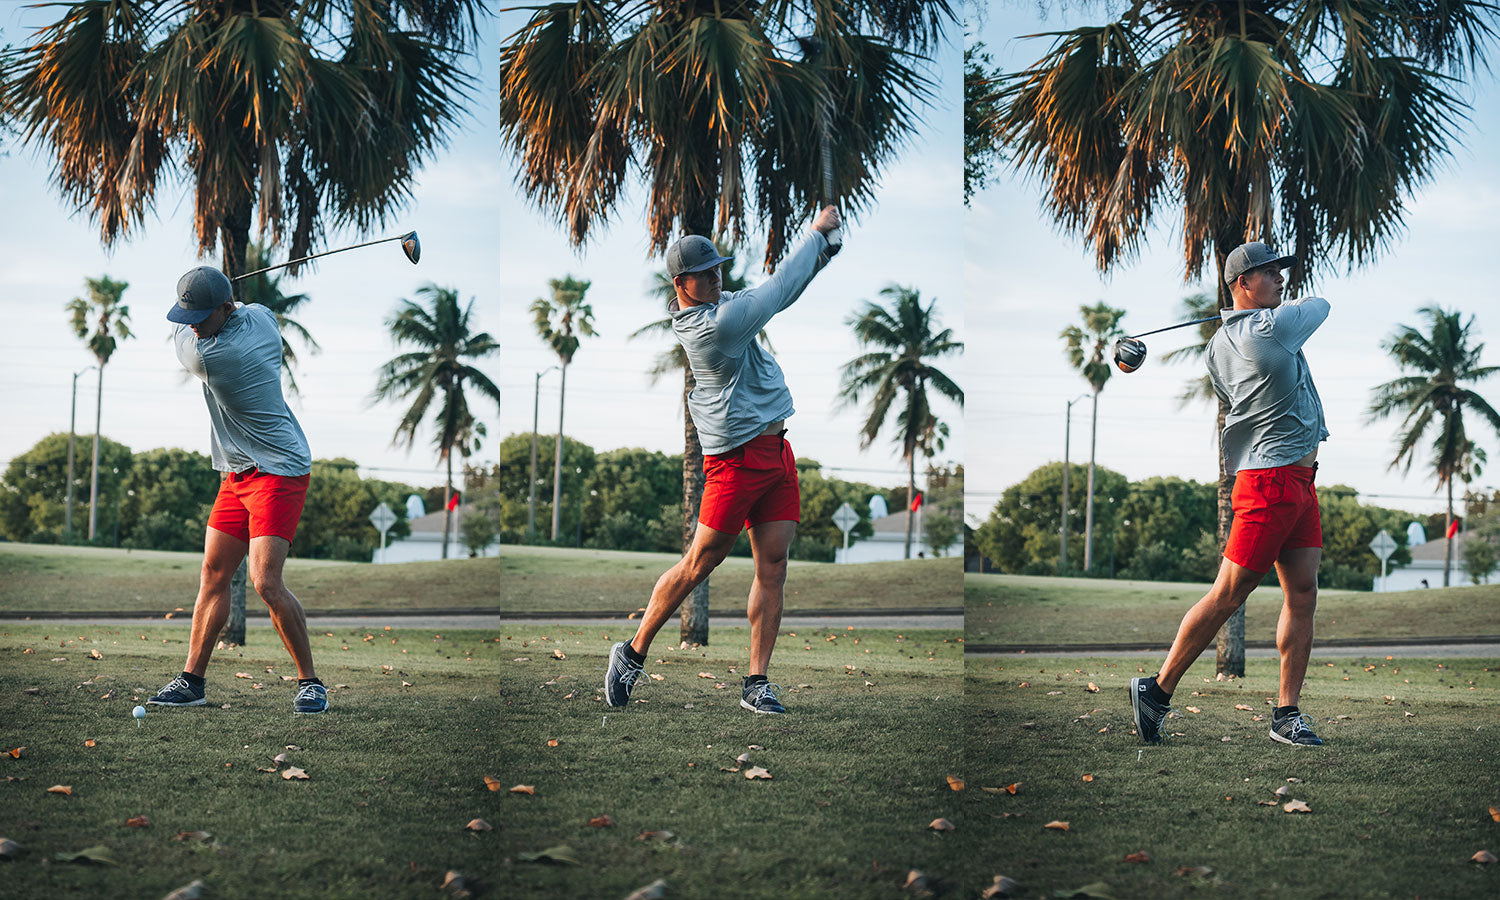 Performance-driven shorts, perfect for the golf course